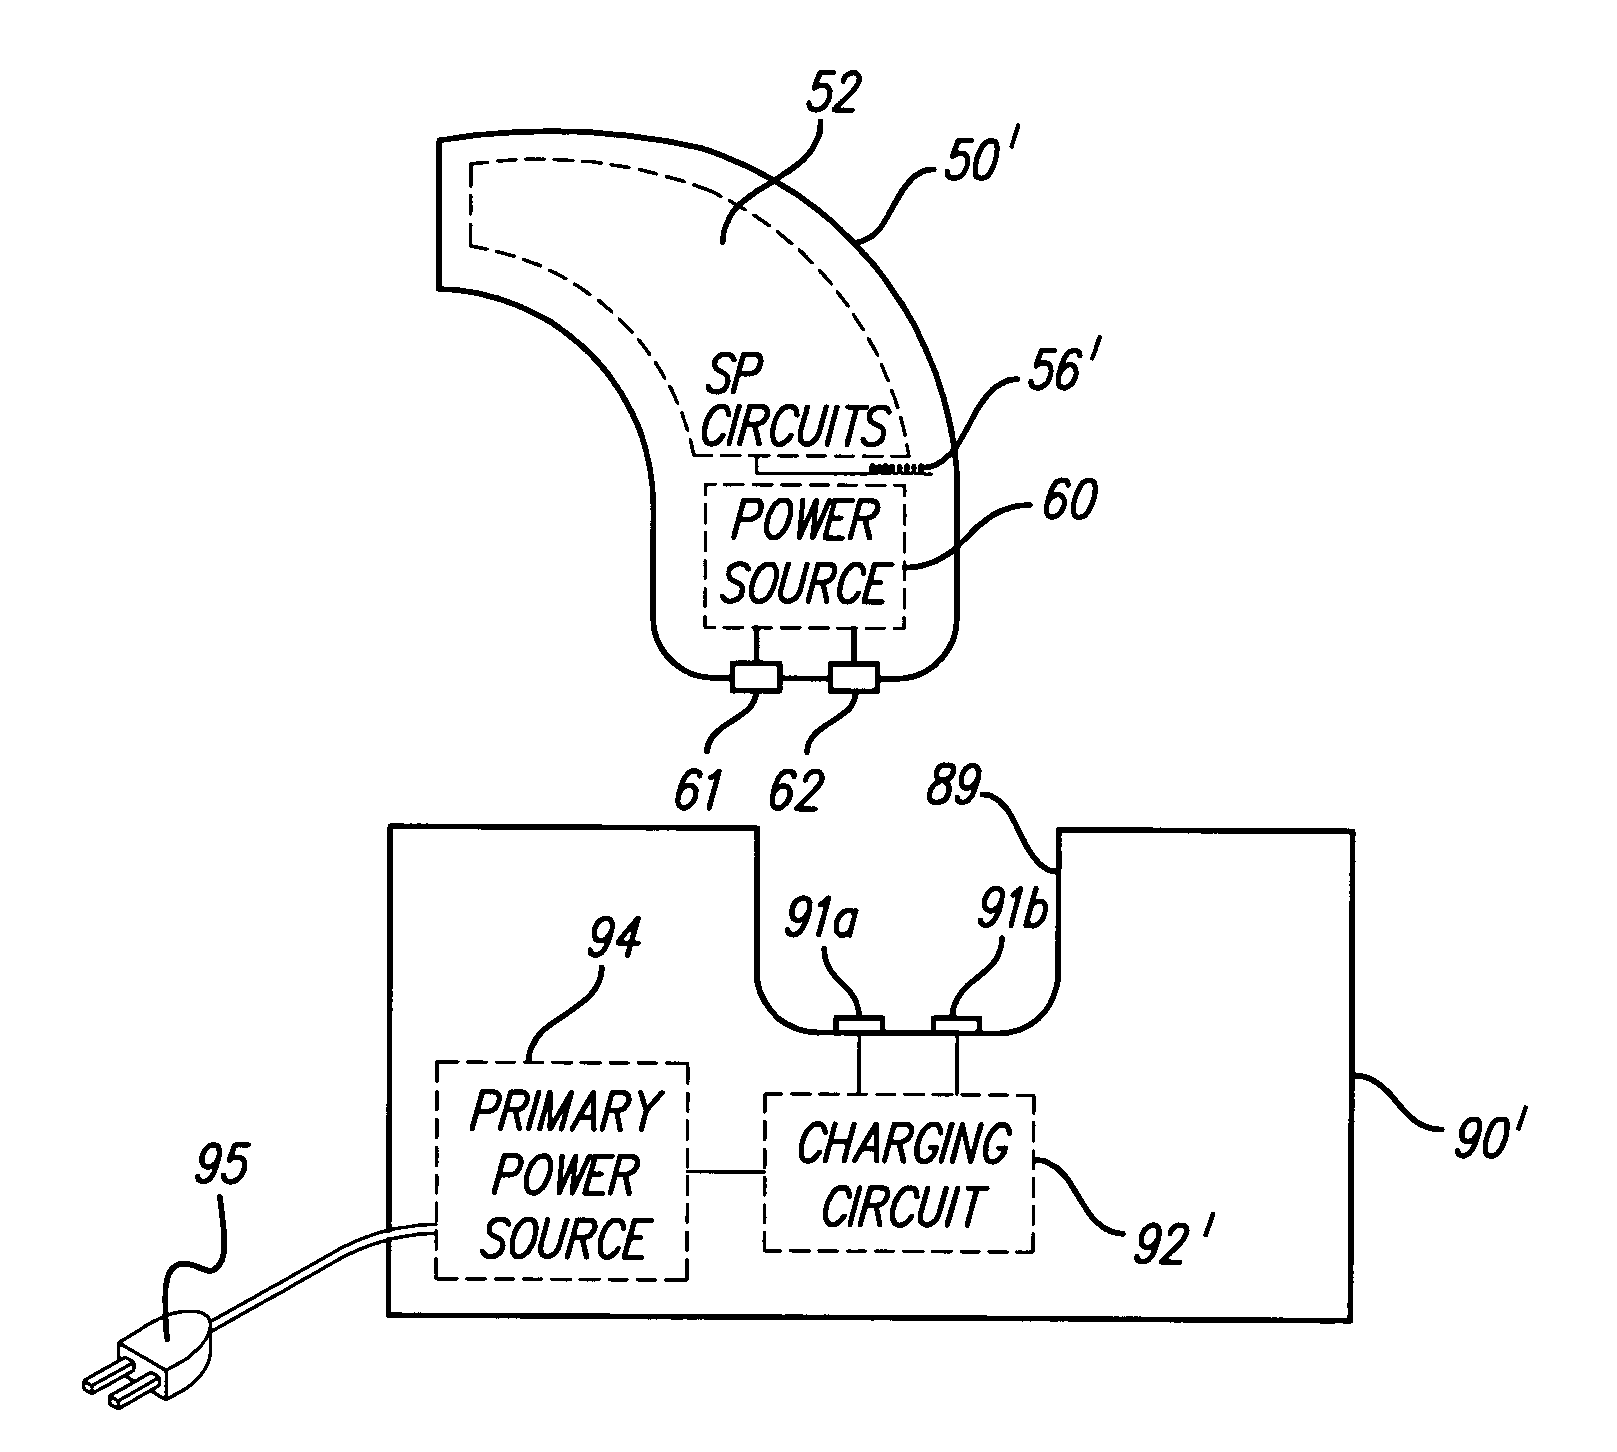 Cochlear implant sound processor with permanently integrated replenishable power source